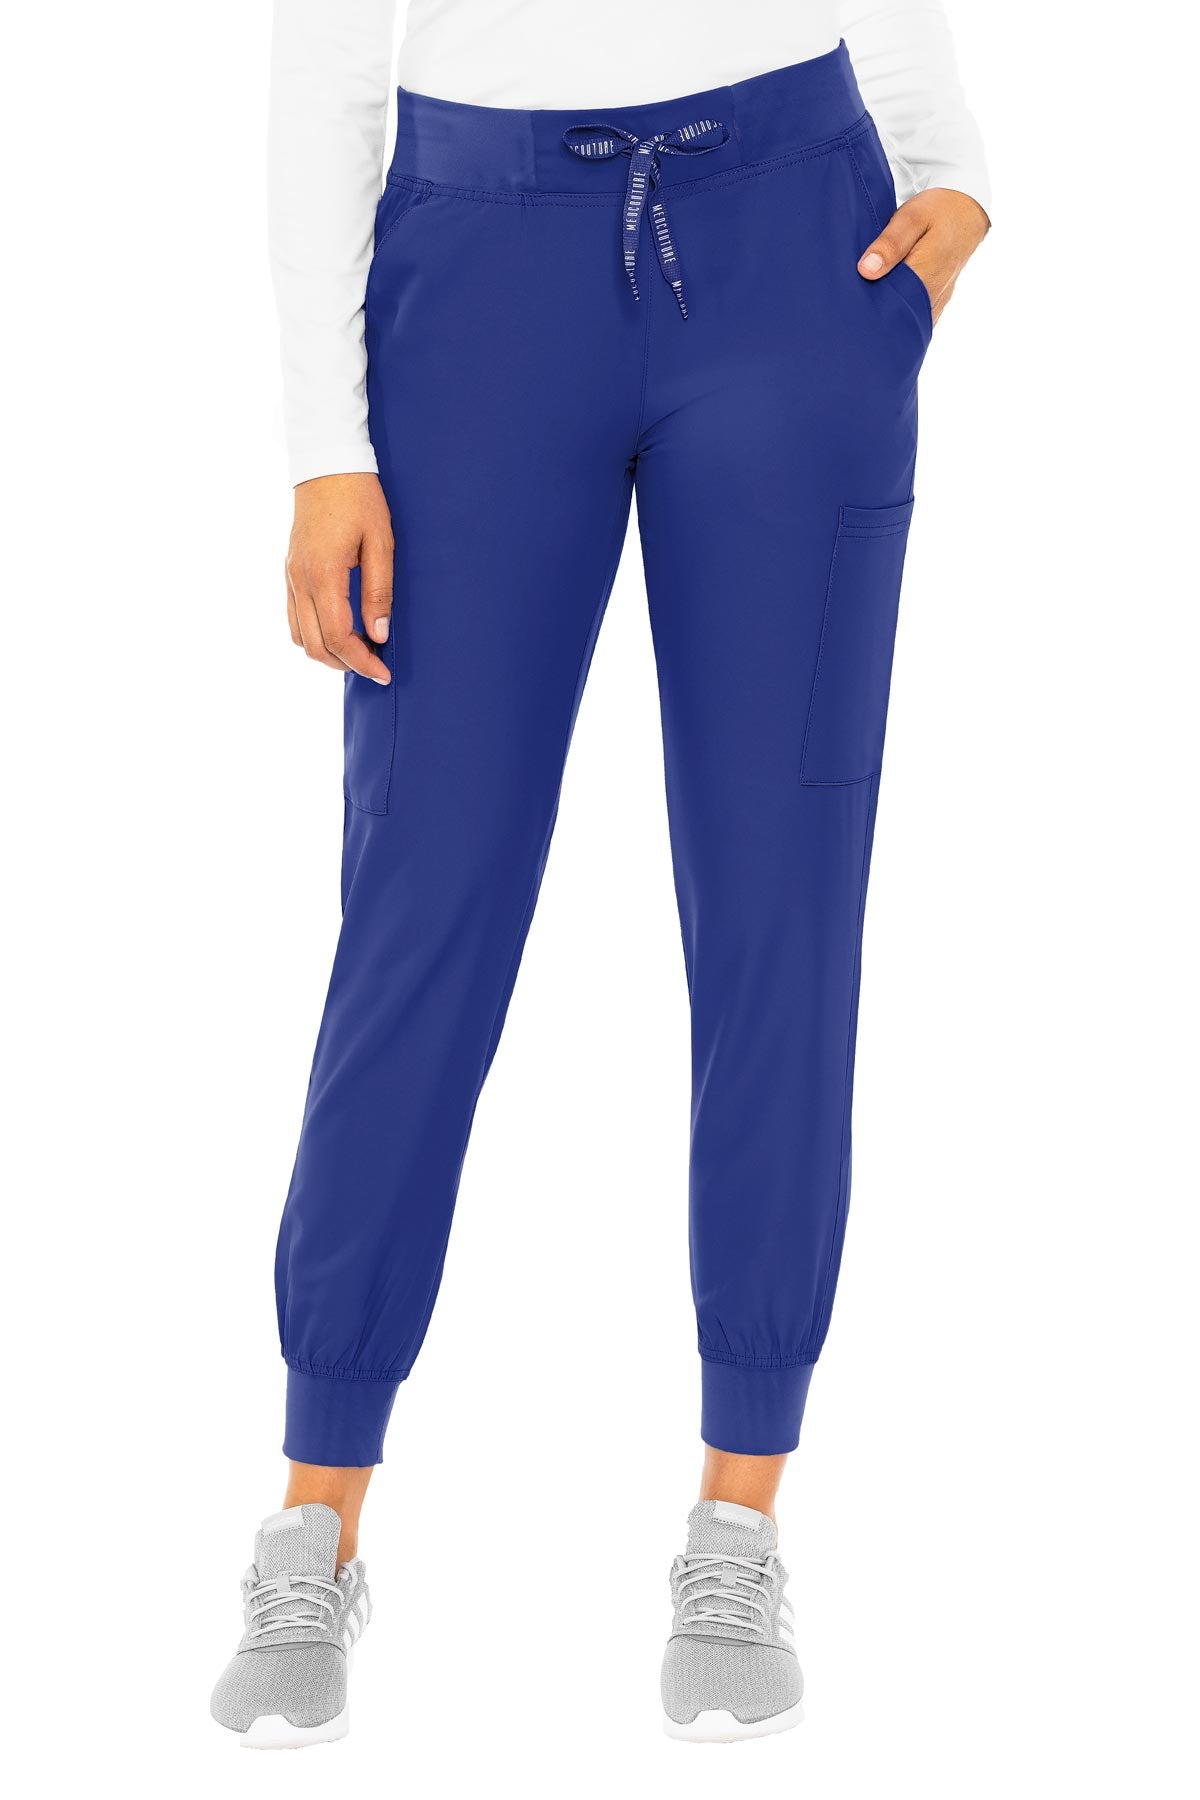 Med Couture Galaxy Blue PANT